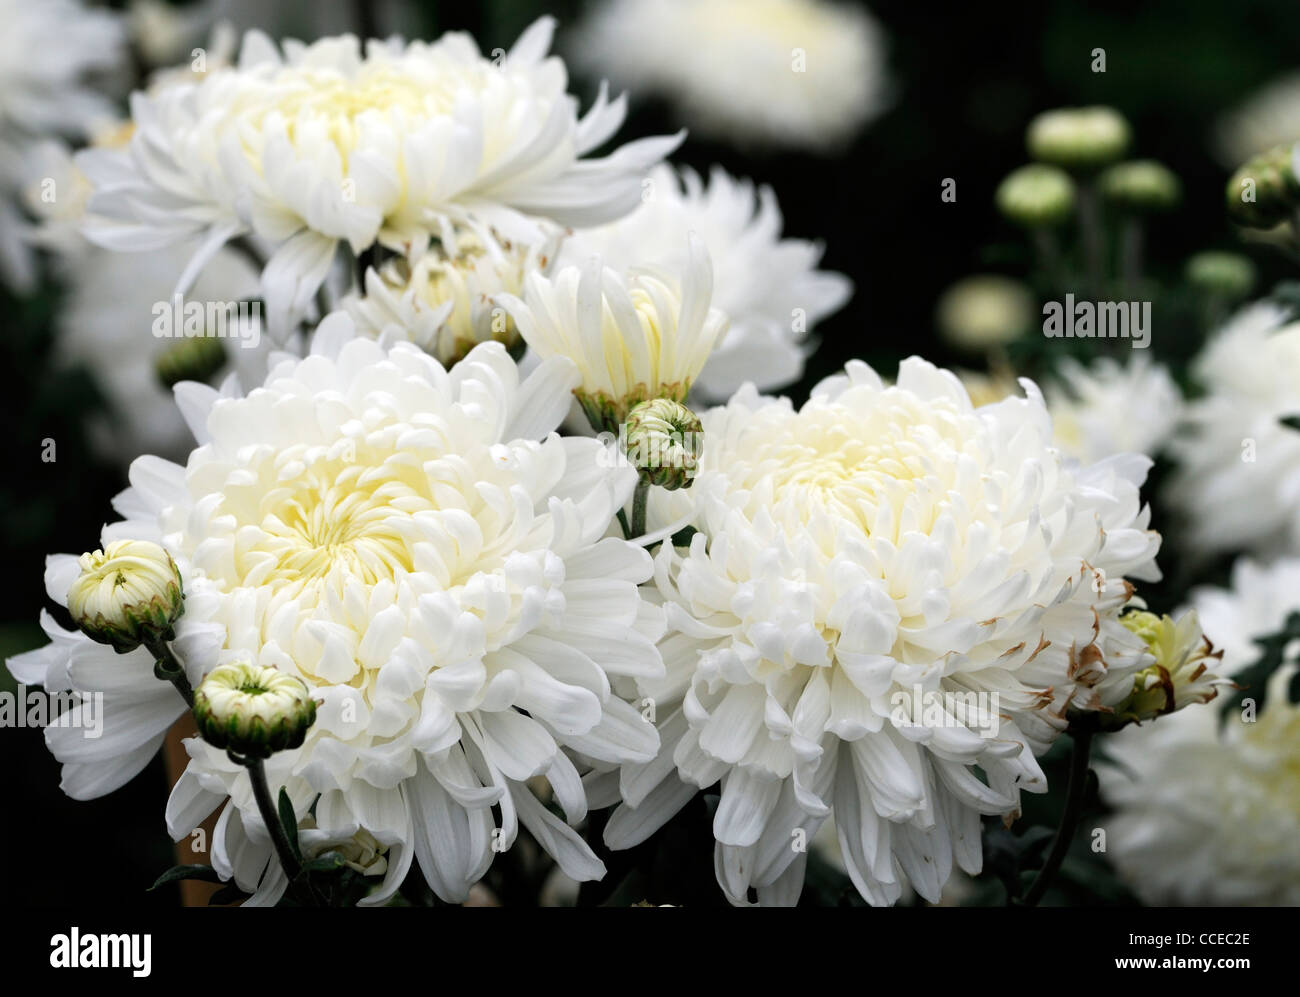 Chrysanthemum impish white cream flowers blooms blossoms half hardy perennial herbaceous plant flower bloom blossom flowers Stock Photo